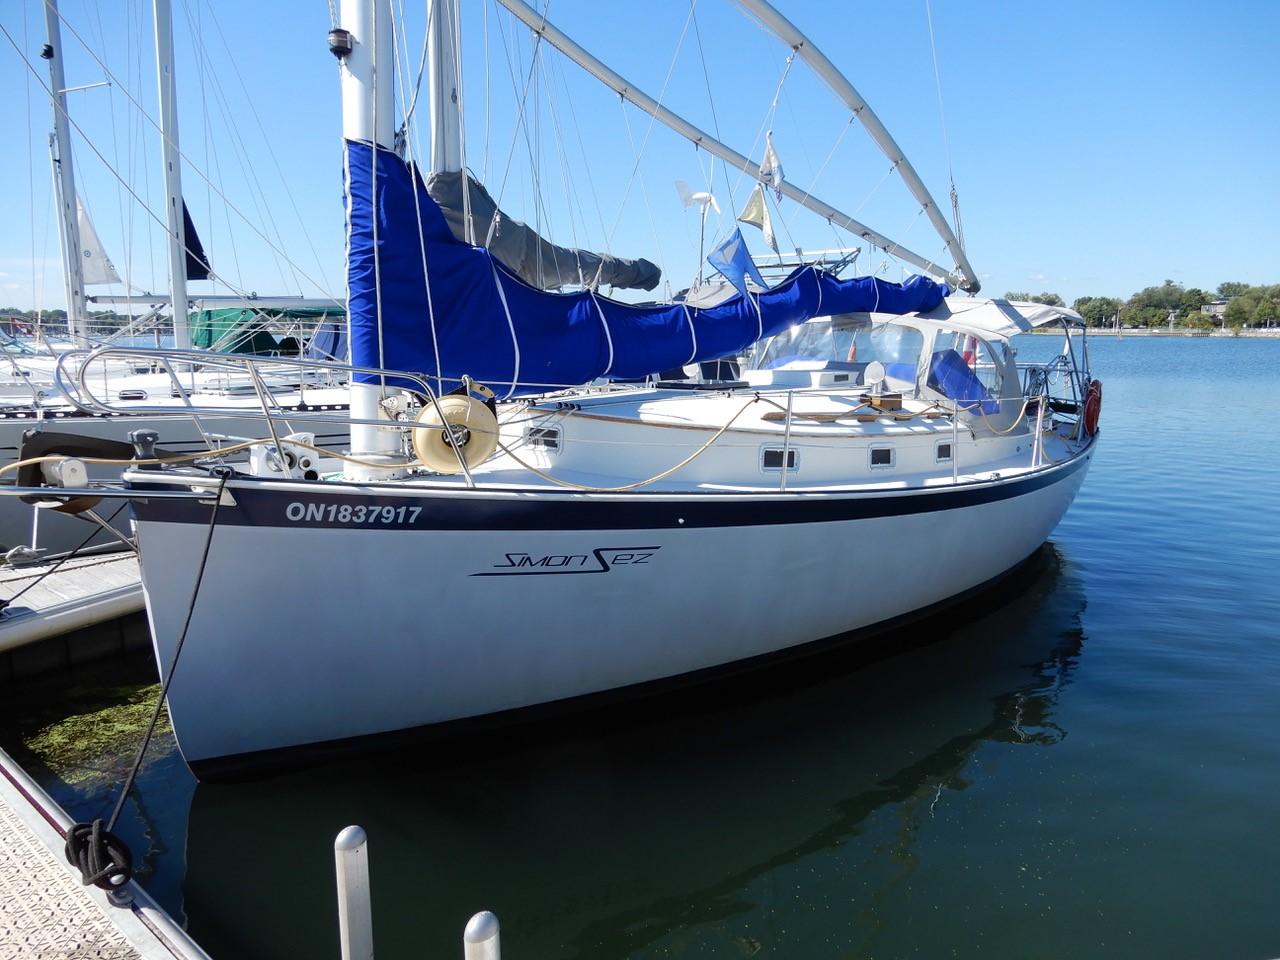 nonsuch sailboat for sale ontario